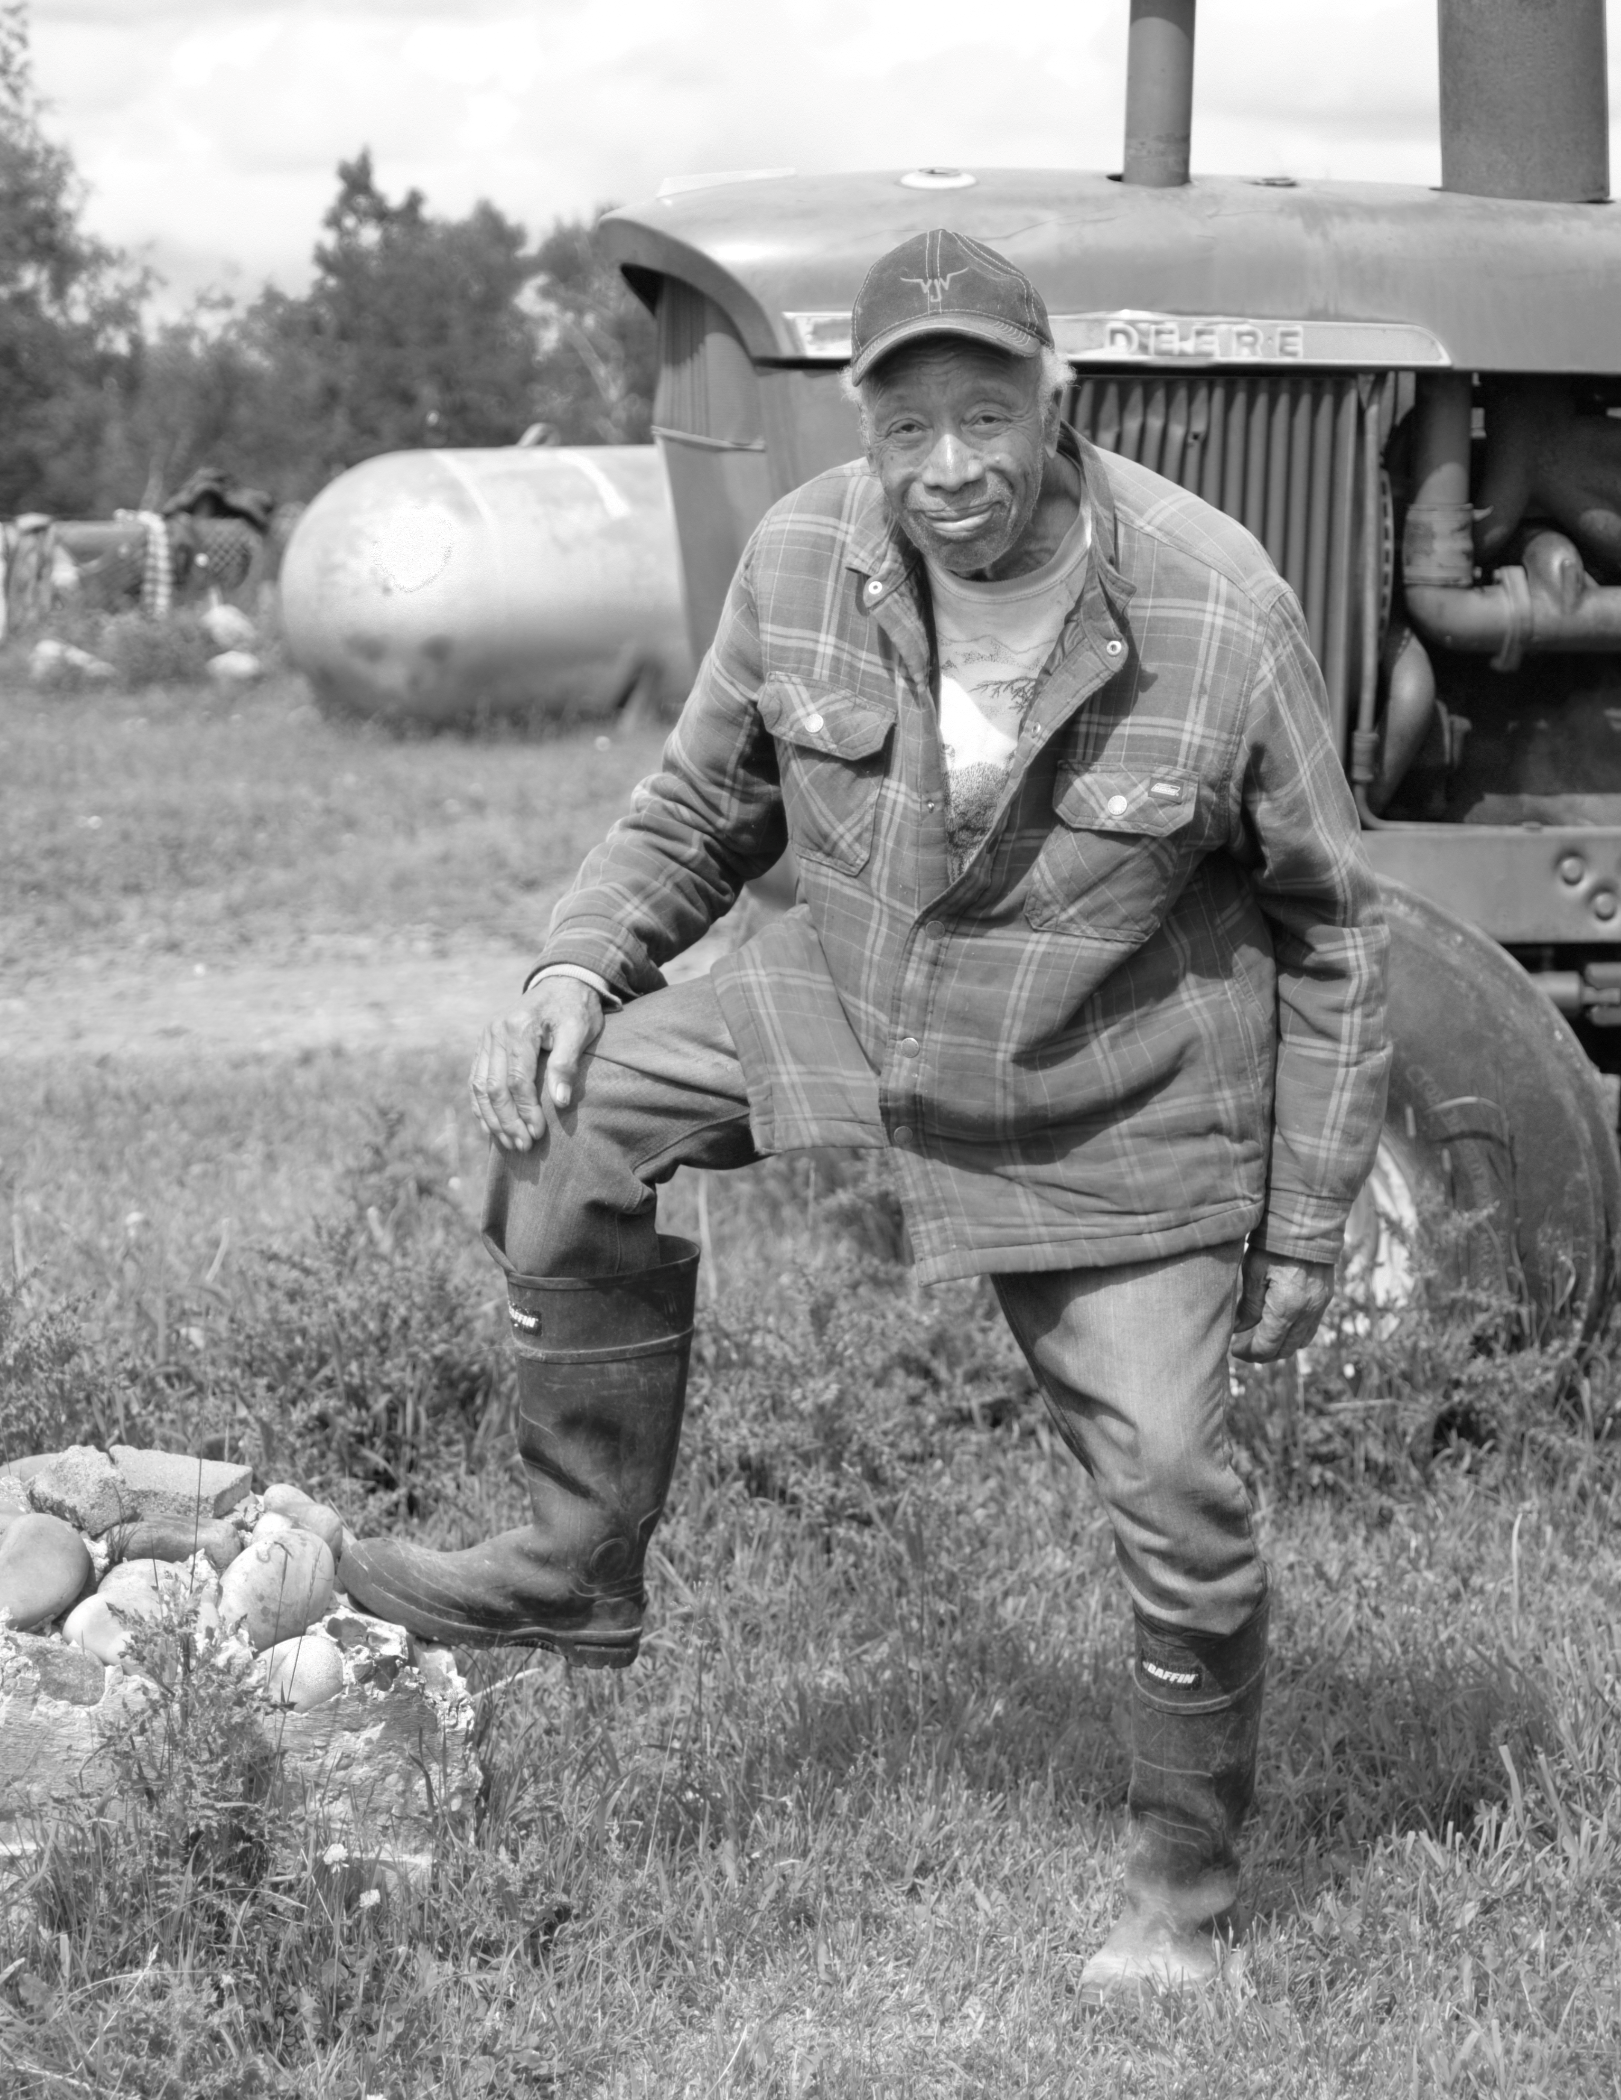 A Black man in a ball cap, flannel shirt and rubber boots stands with one foot on a rock. There is a tractor in the background.